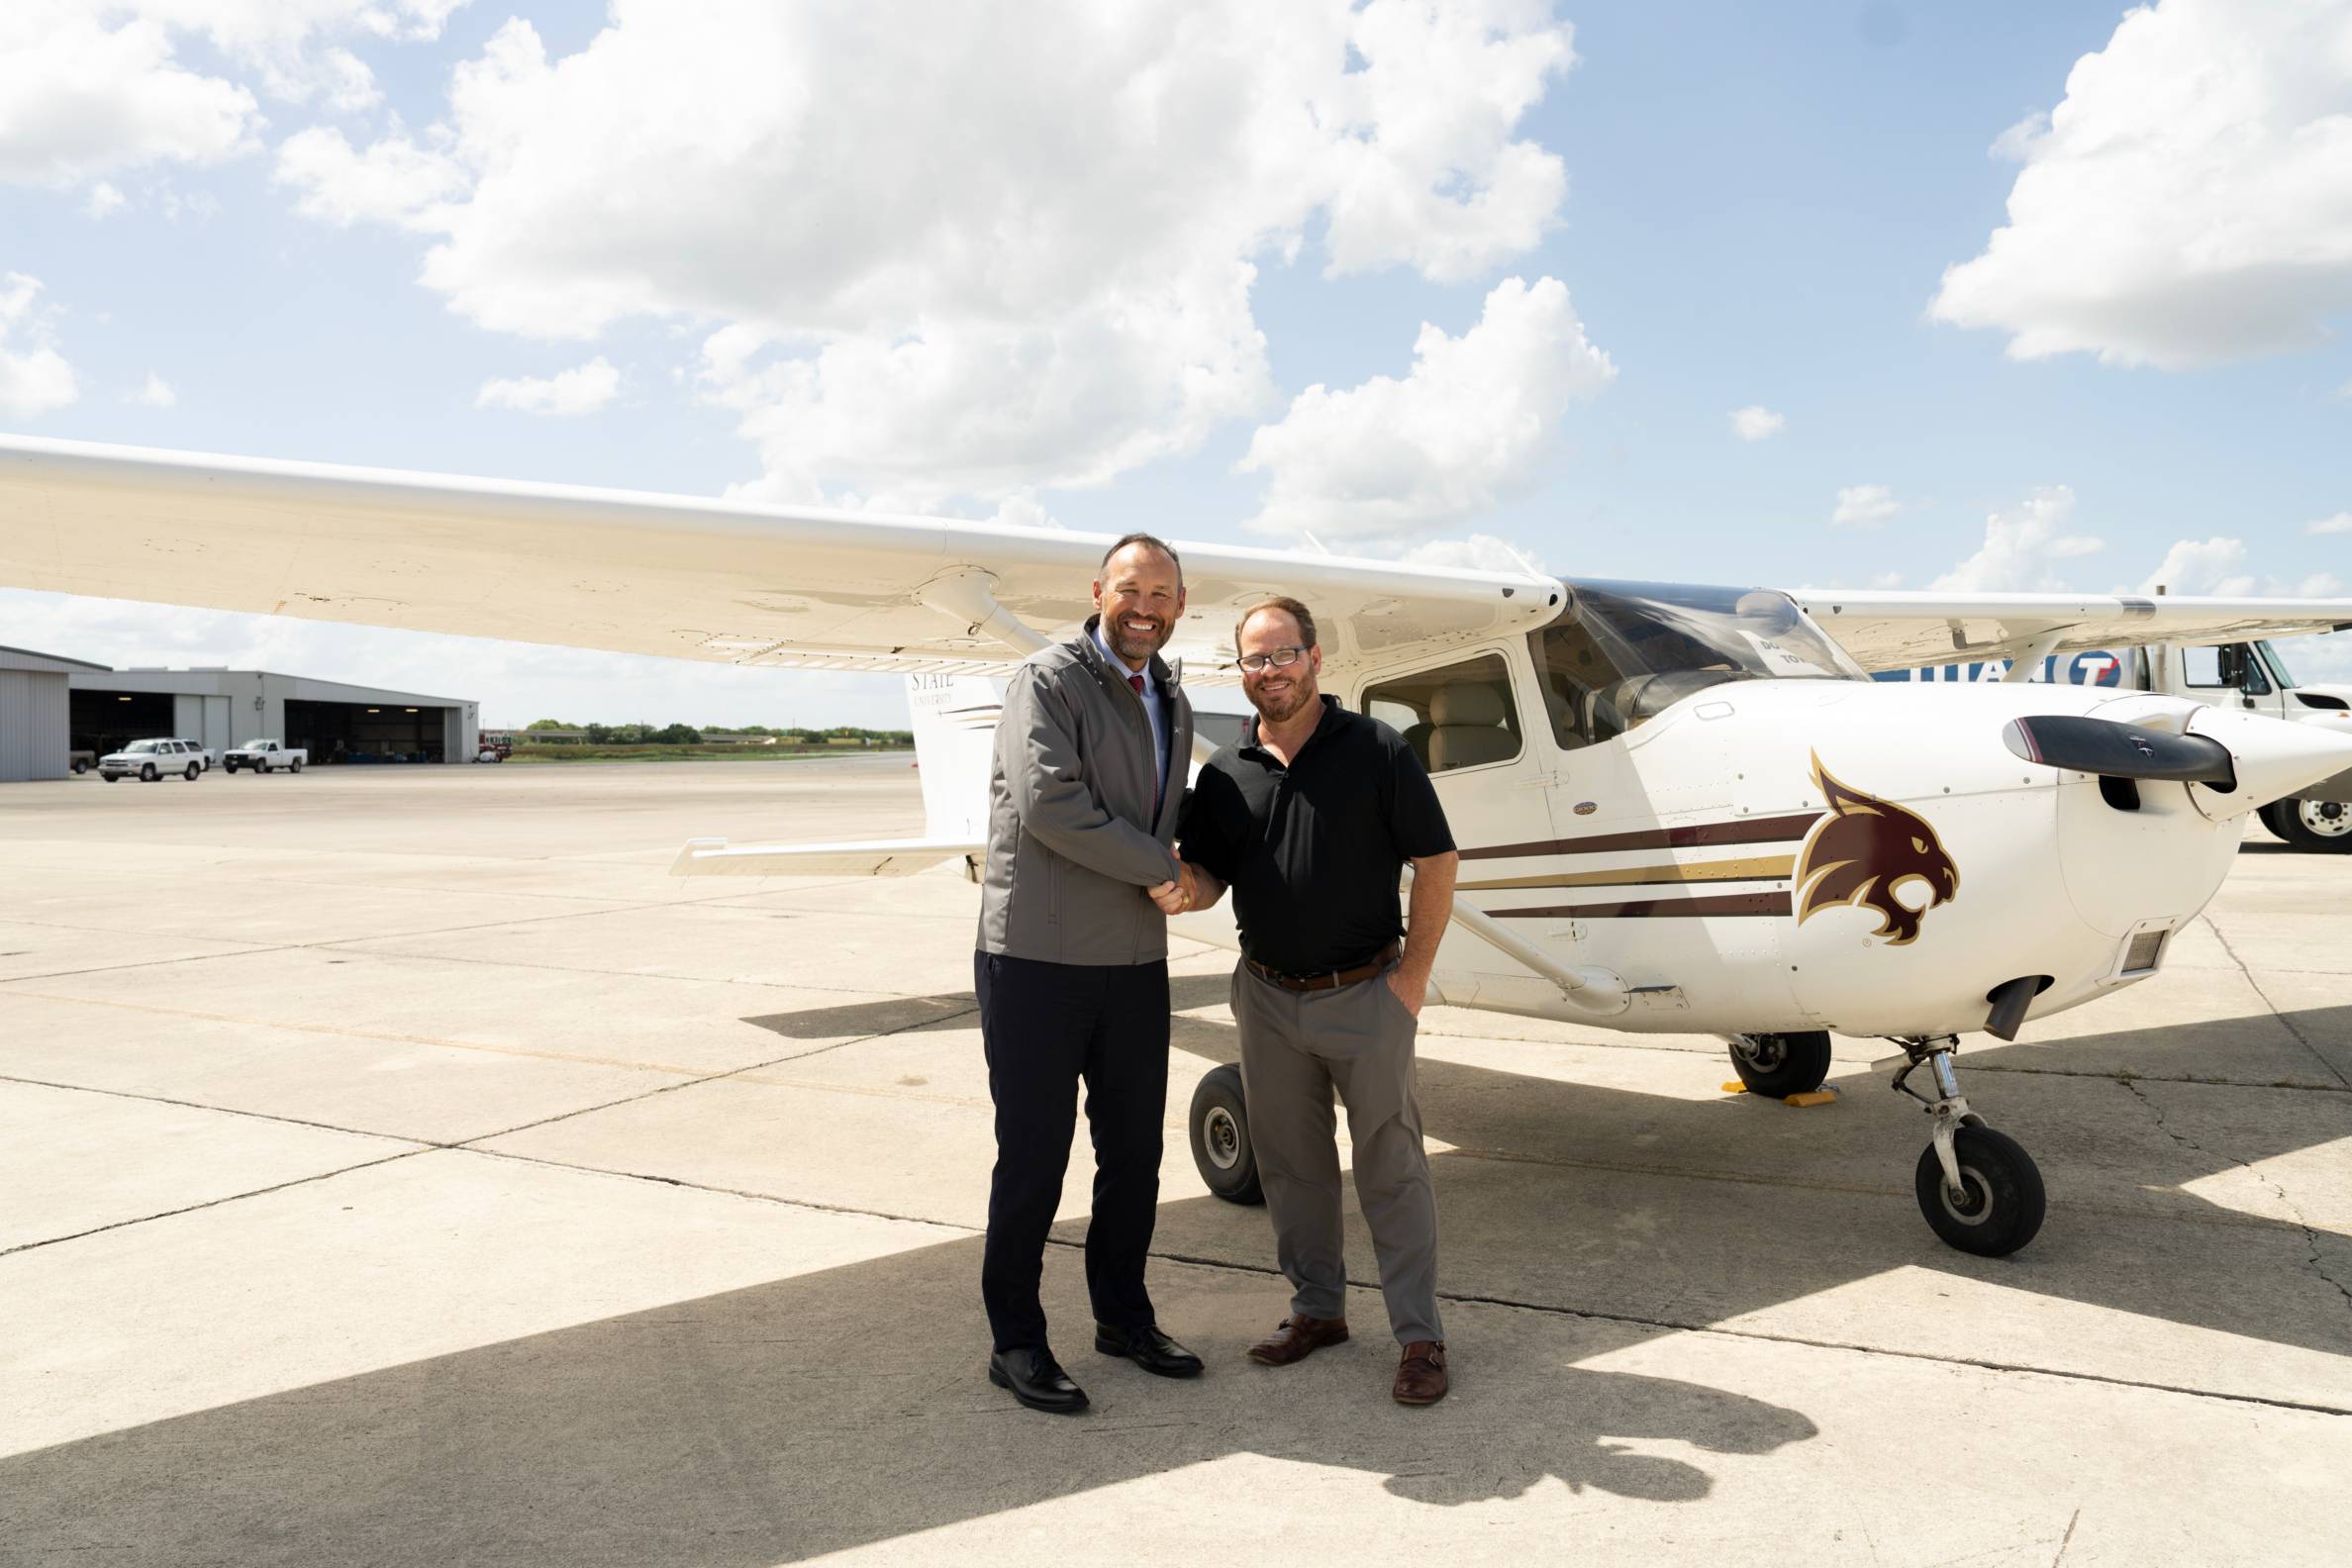 Texas State University partners with Coast Flight and TAP to launch new aviation science degree program